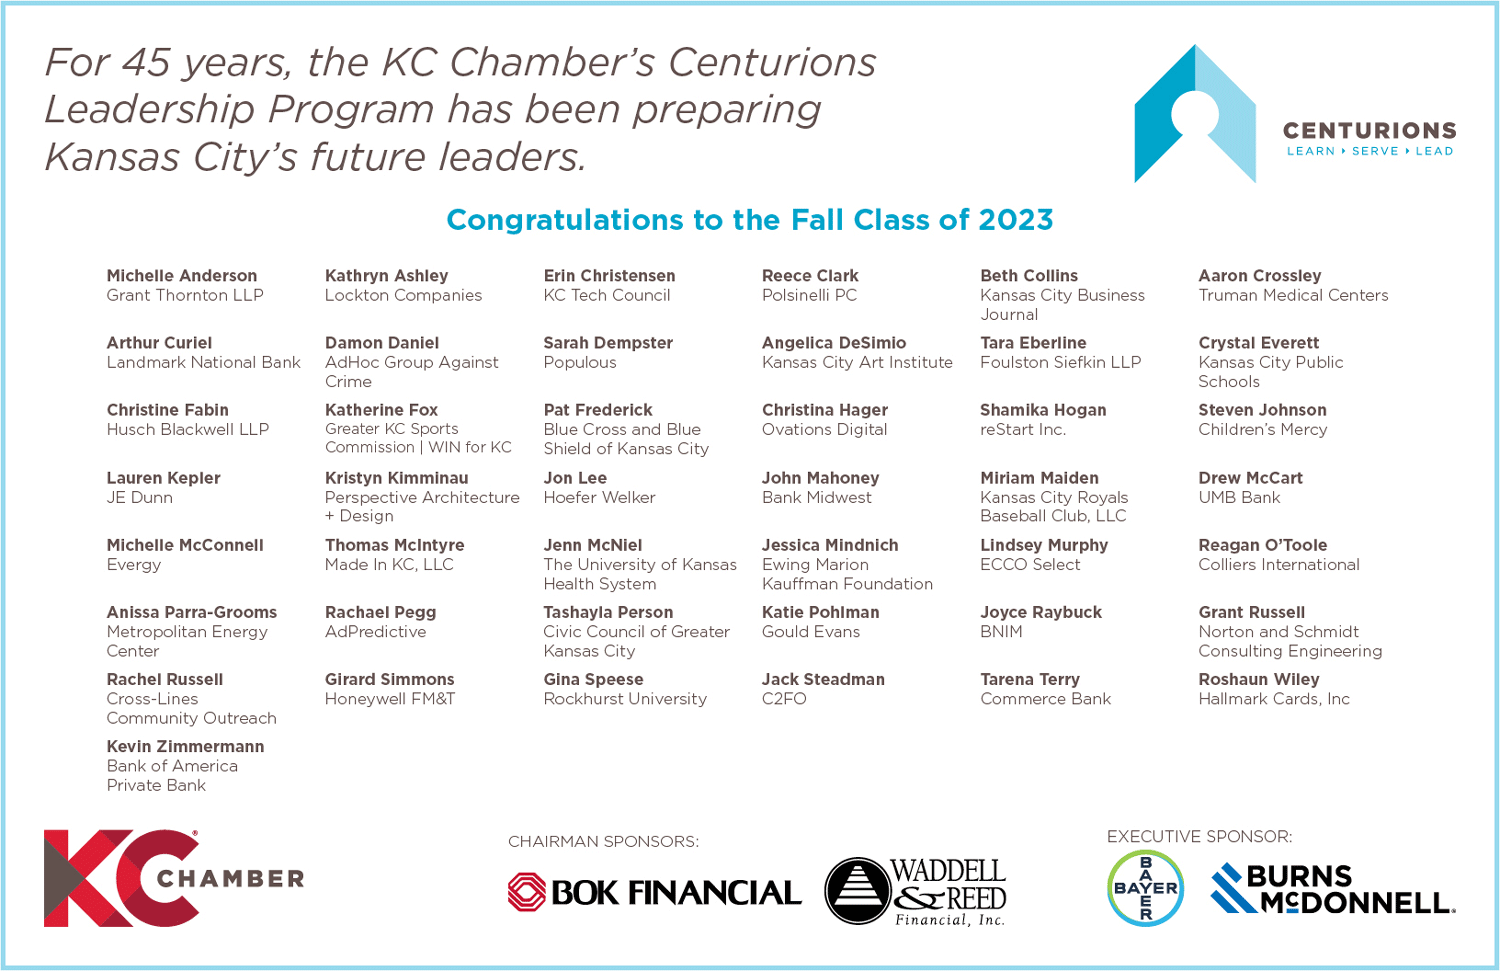 Names of Centurions Class of 2023